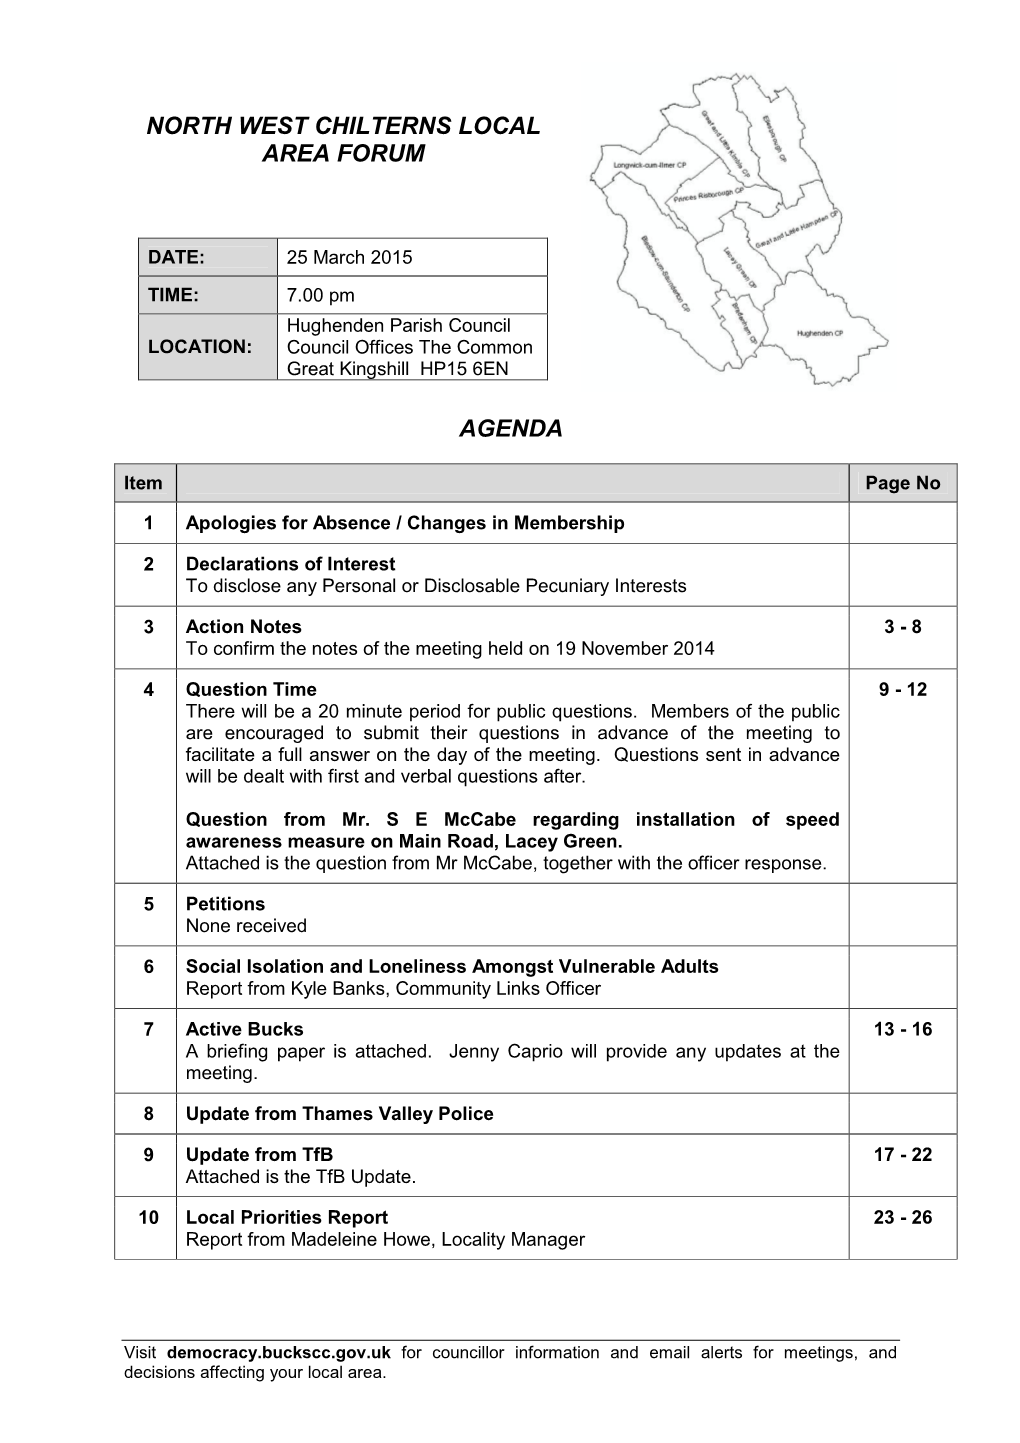 (Public Pack)Agenda Document for North West Chilterns Local Area